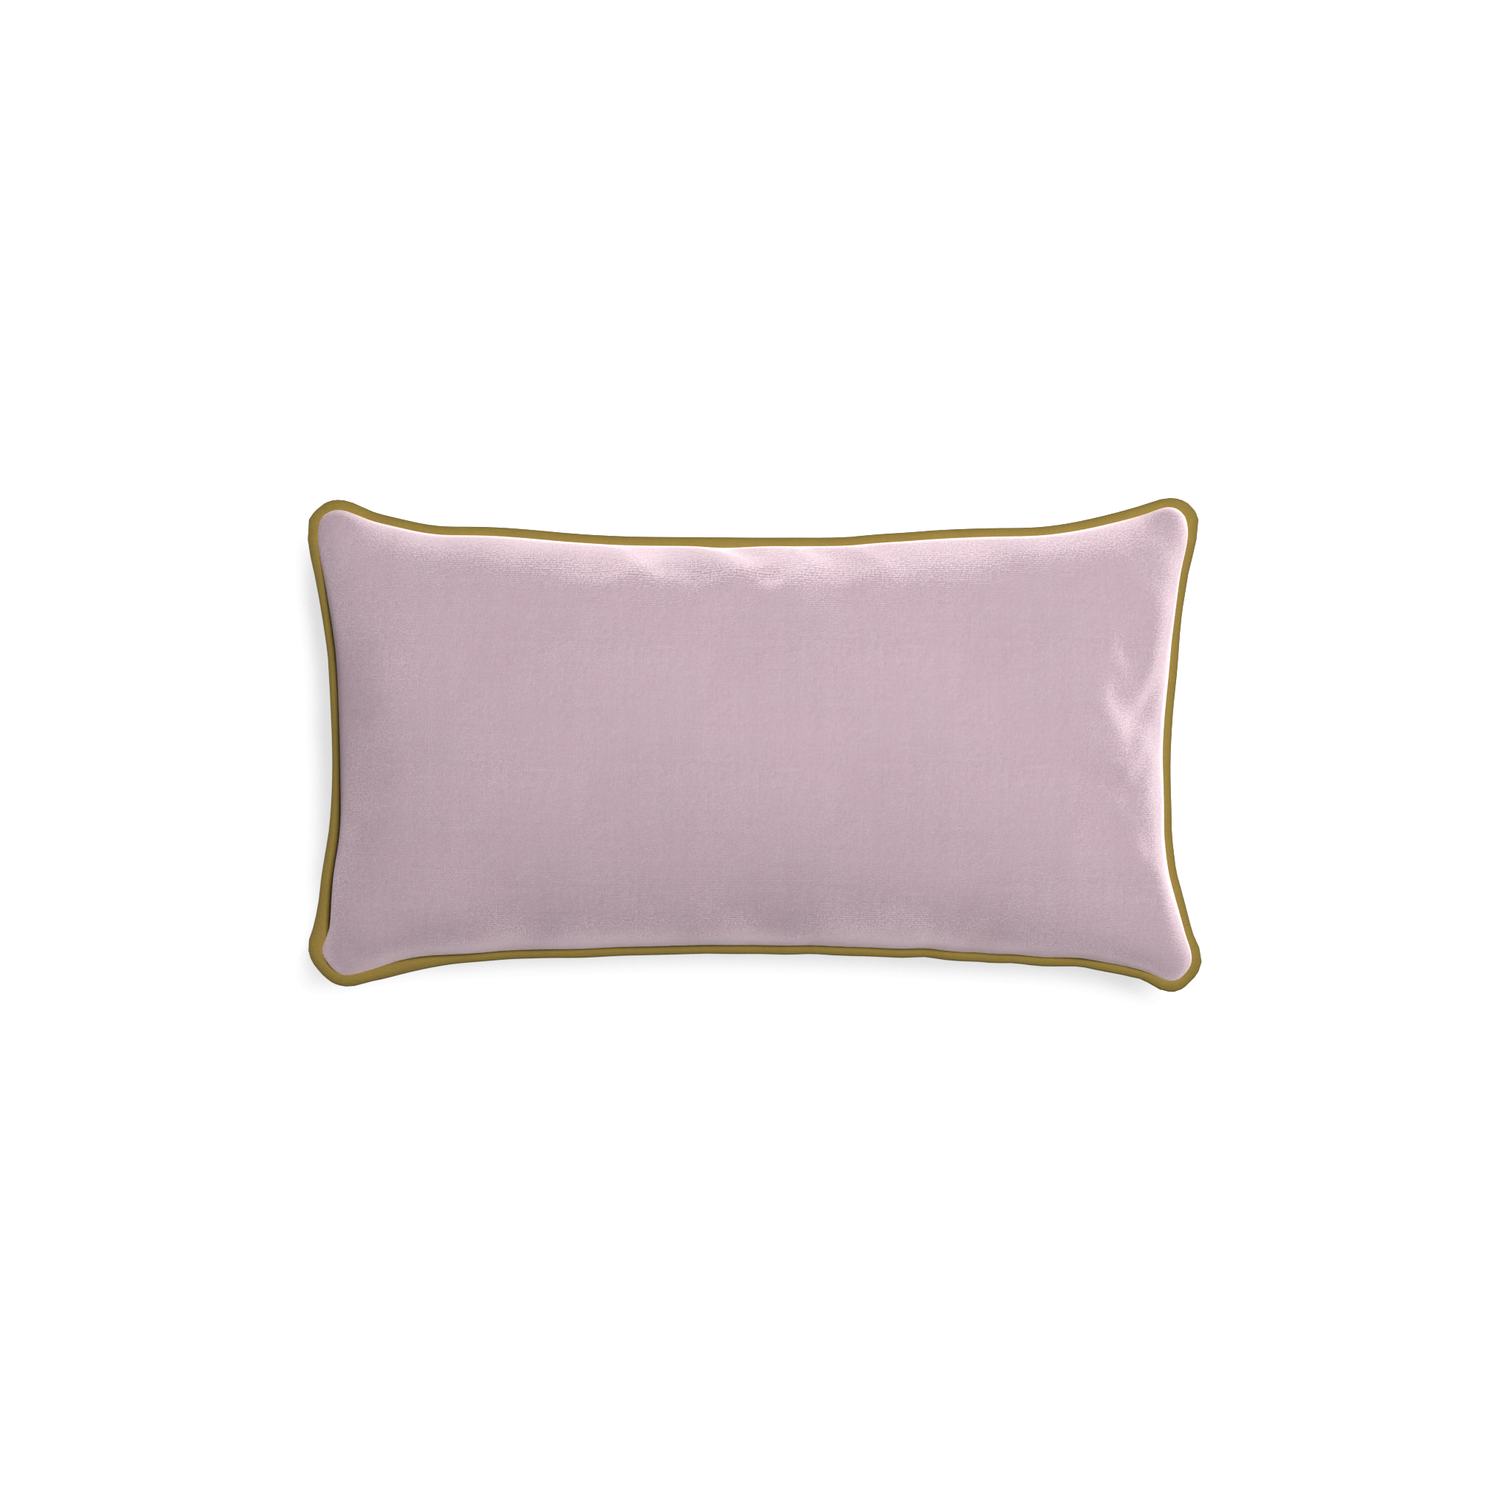 Petite-lumbar lilac velvet custom lilacpillow with c piping on white background